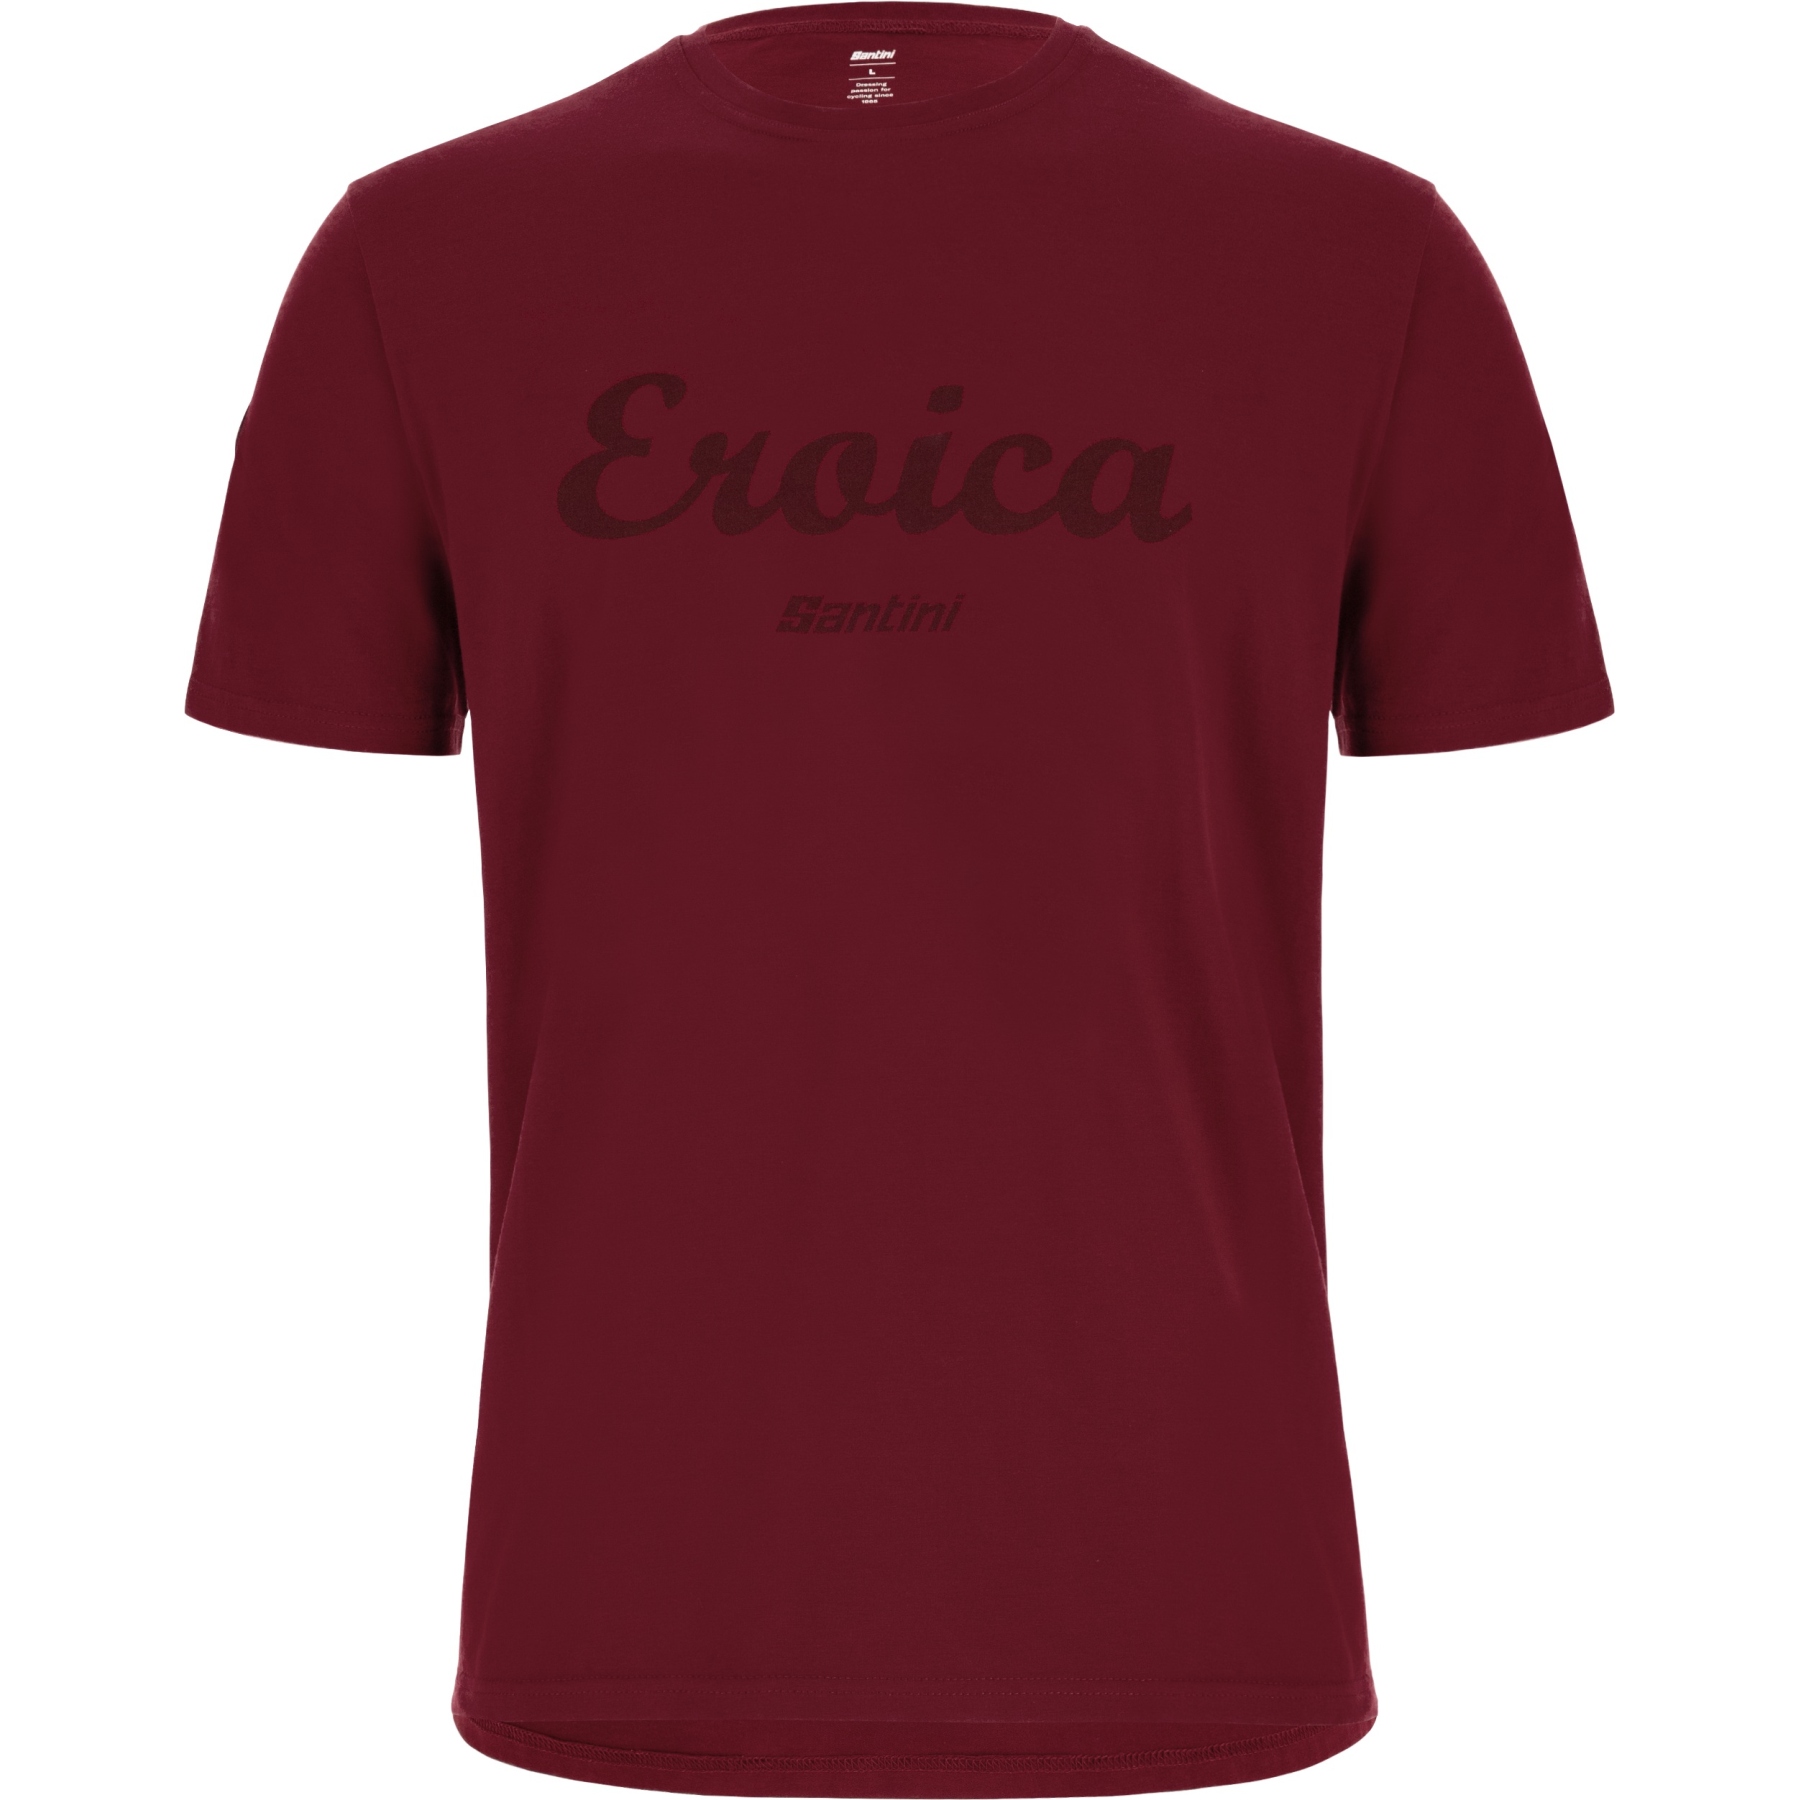 Picture of Santini Eroica E T-Shirt ER499COTE - red RS